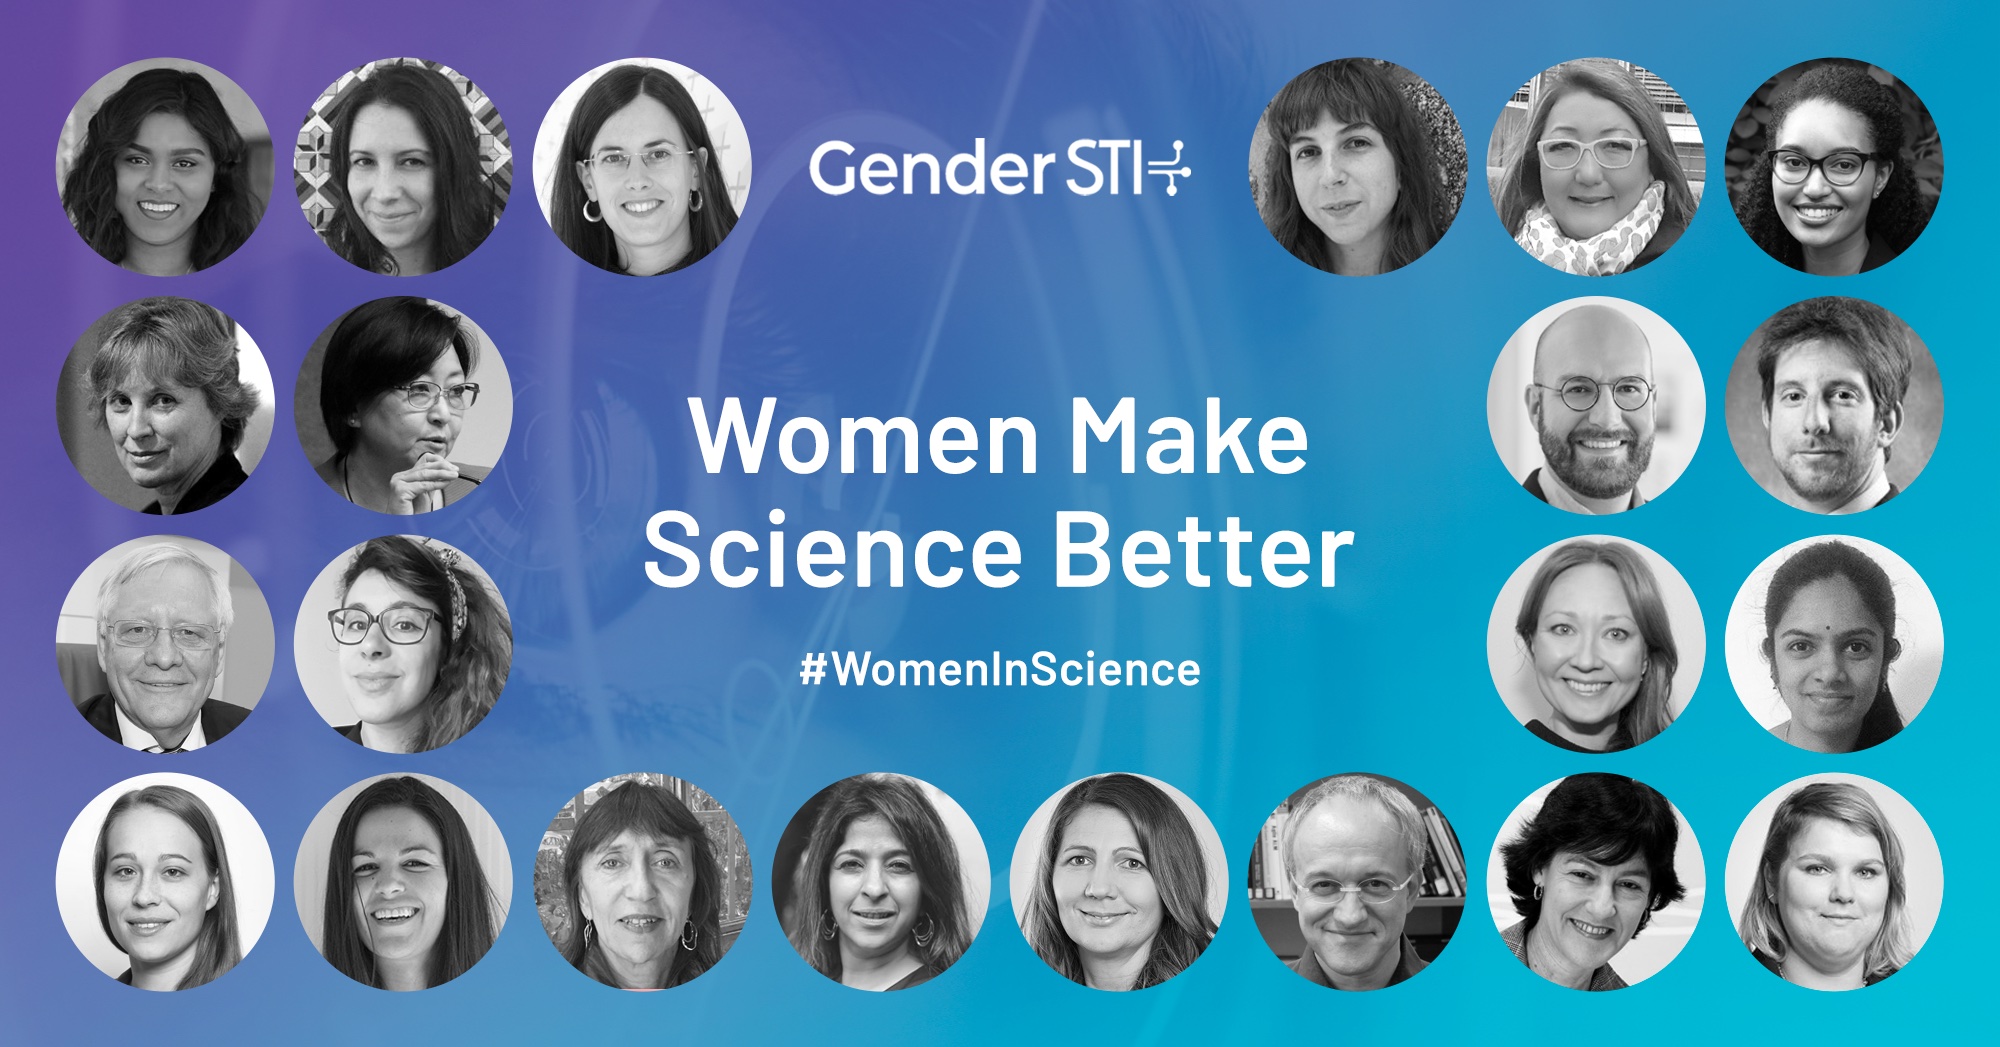 Gender STI spoke to 22 researchers and experts in science for the International Day of Women and Girls in Science.